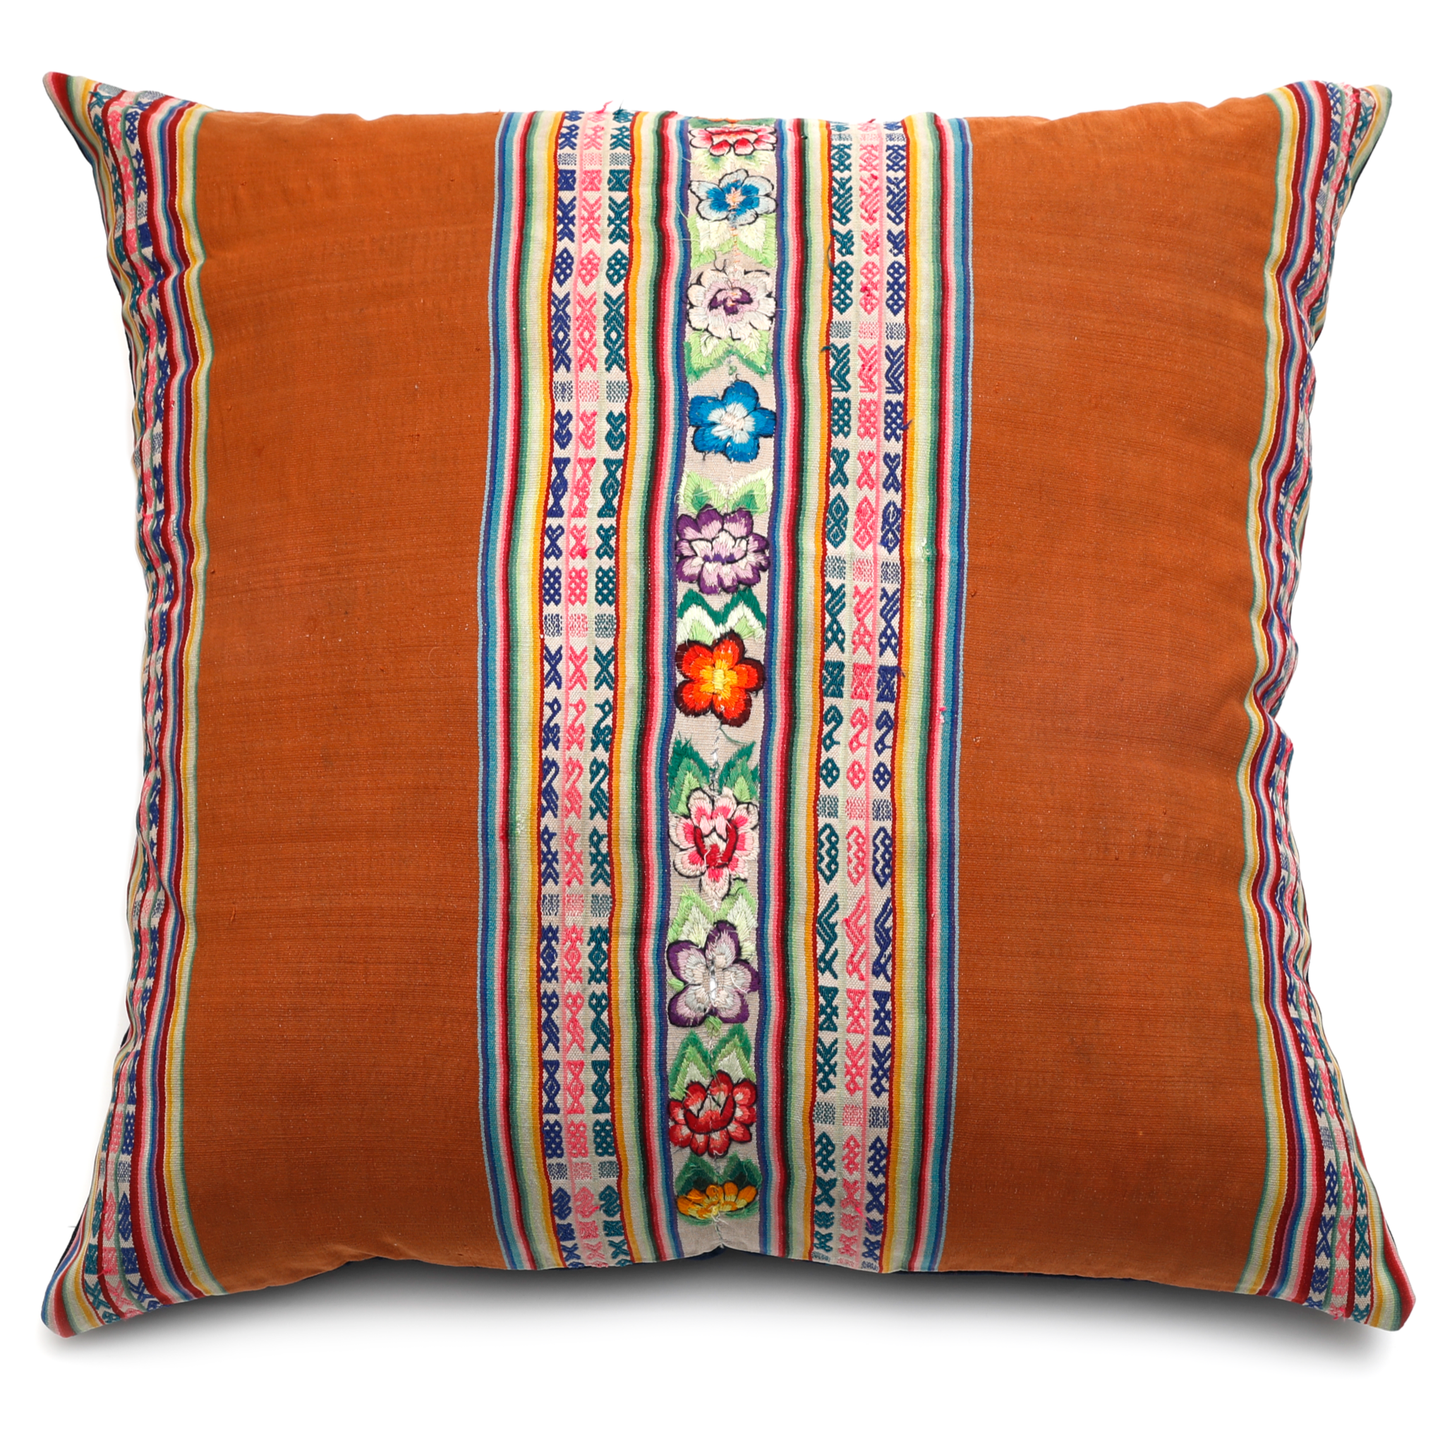 Intiearth_Peruvian_vintage_textile_floor_pillow_rusty brown embroidered stripe